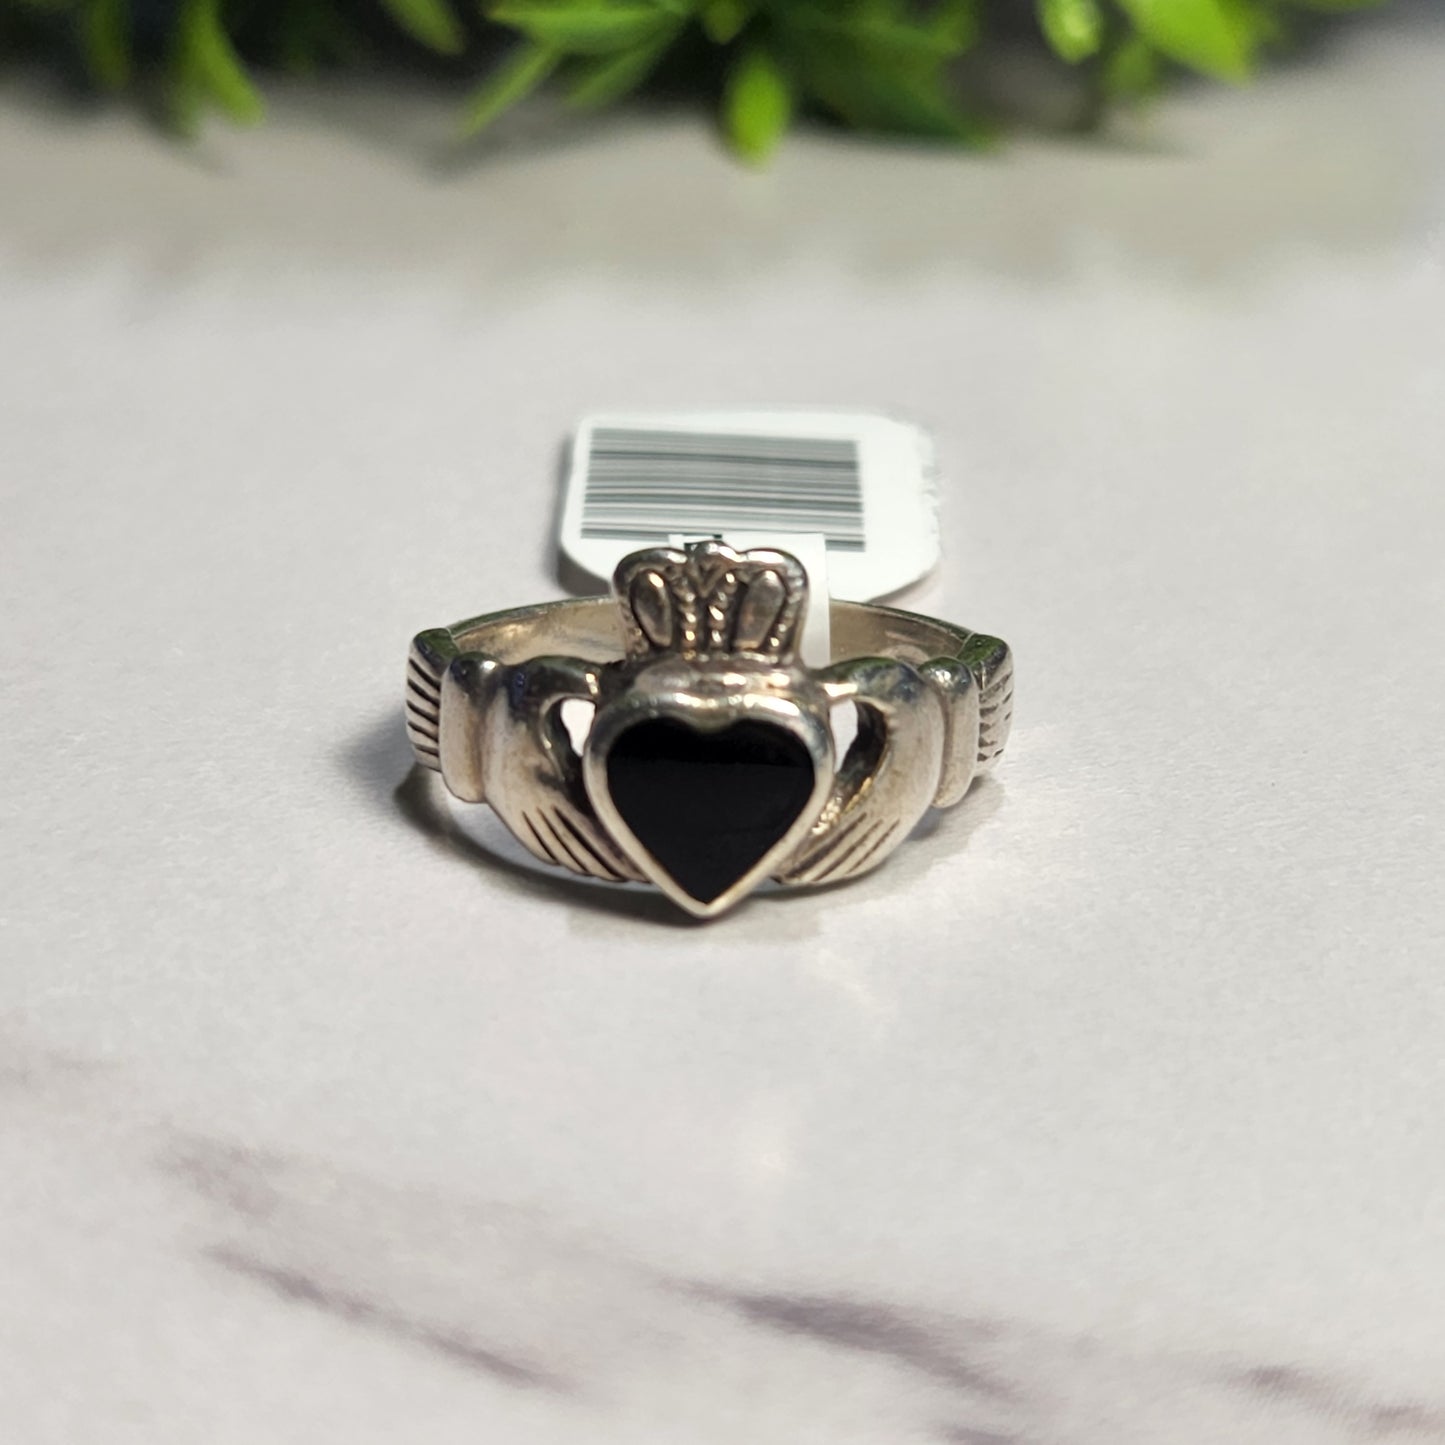 925 Sterling Silver Claddagh Ring